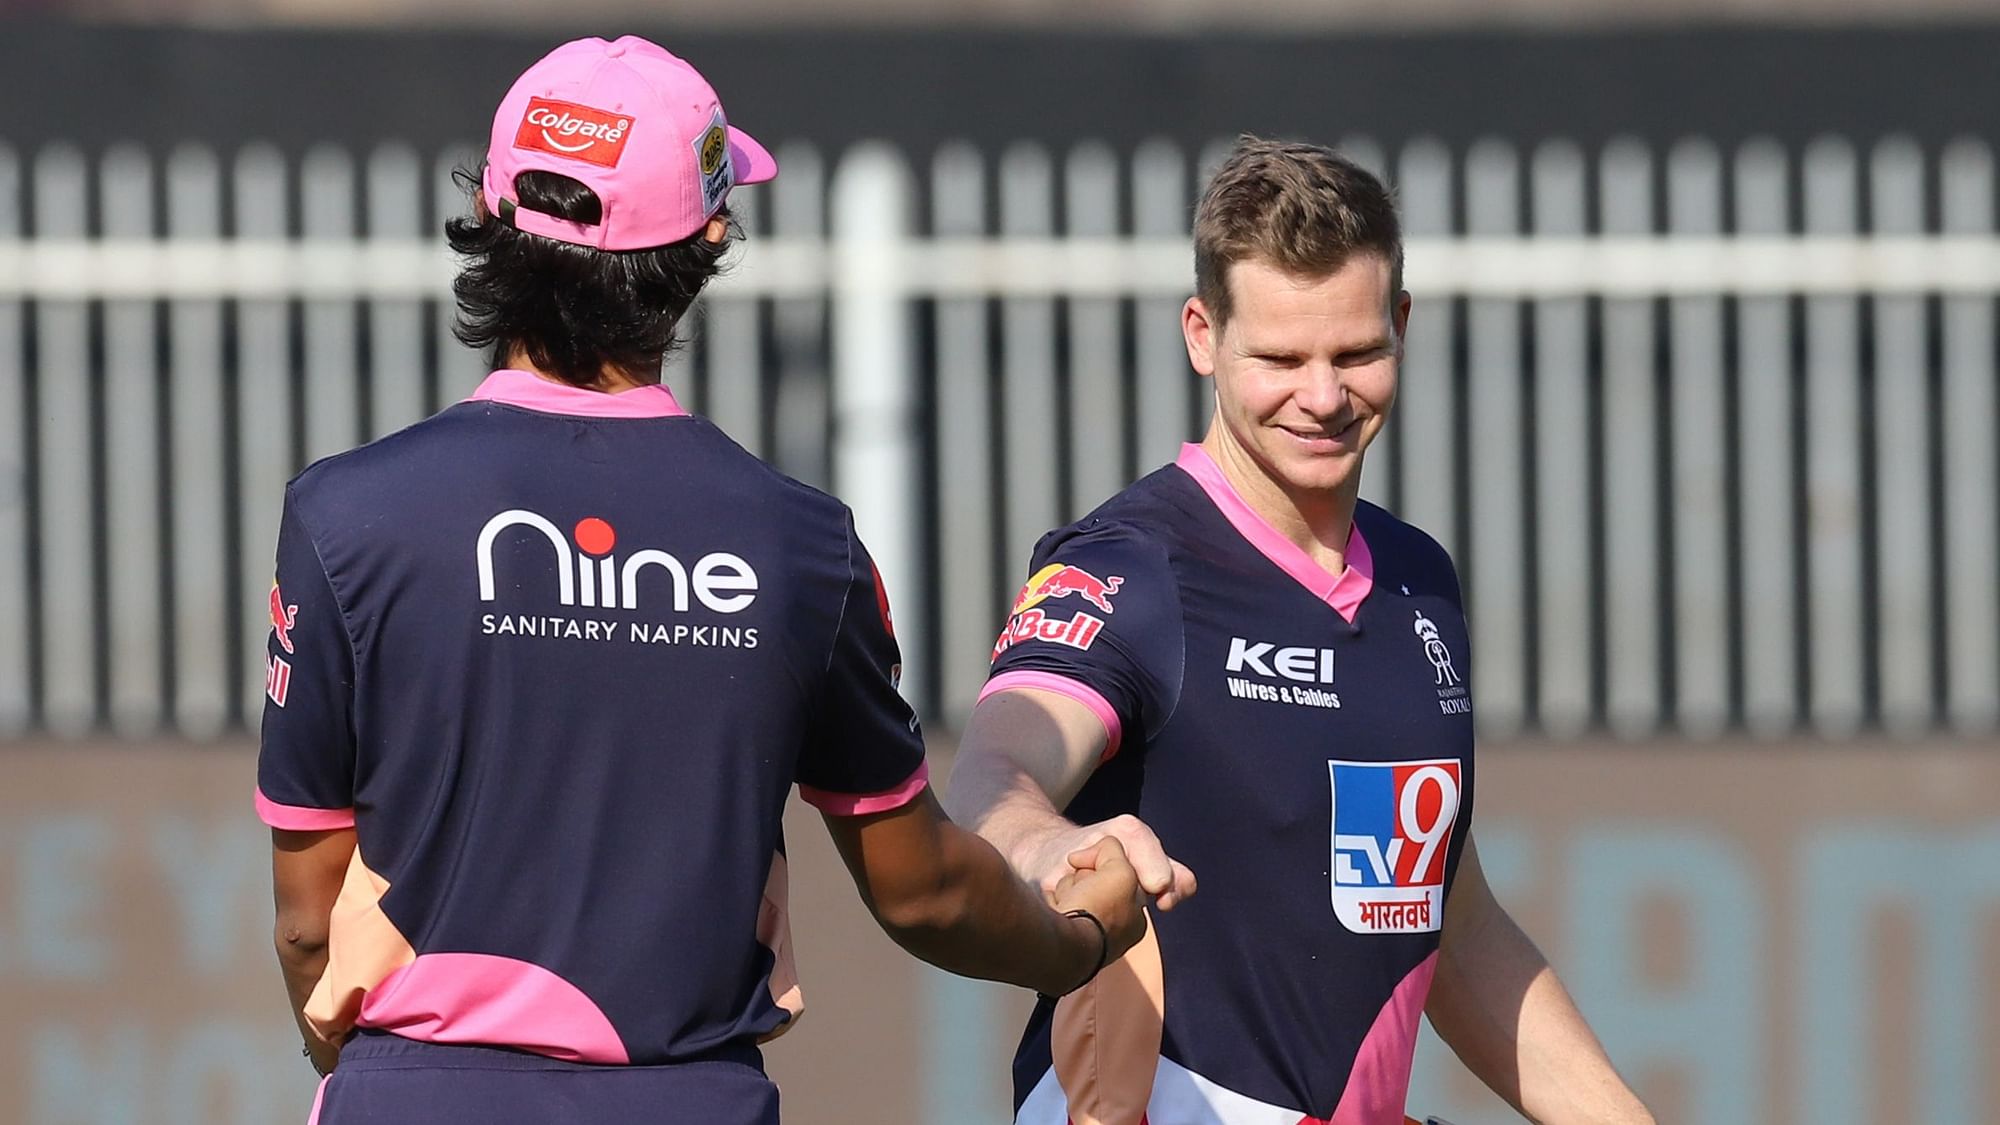 Steve Smith has won the toss against Kings XI Punjab and elected to bowl first at Sharjah.